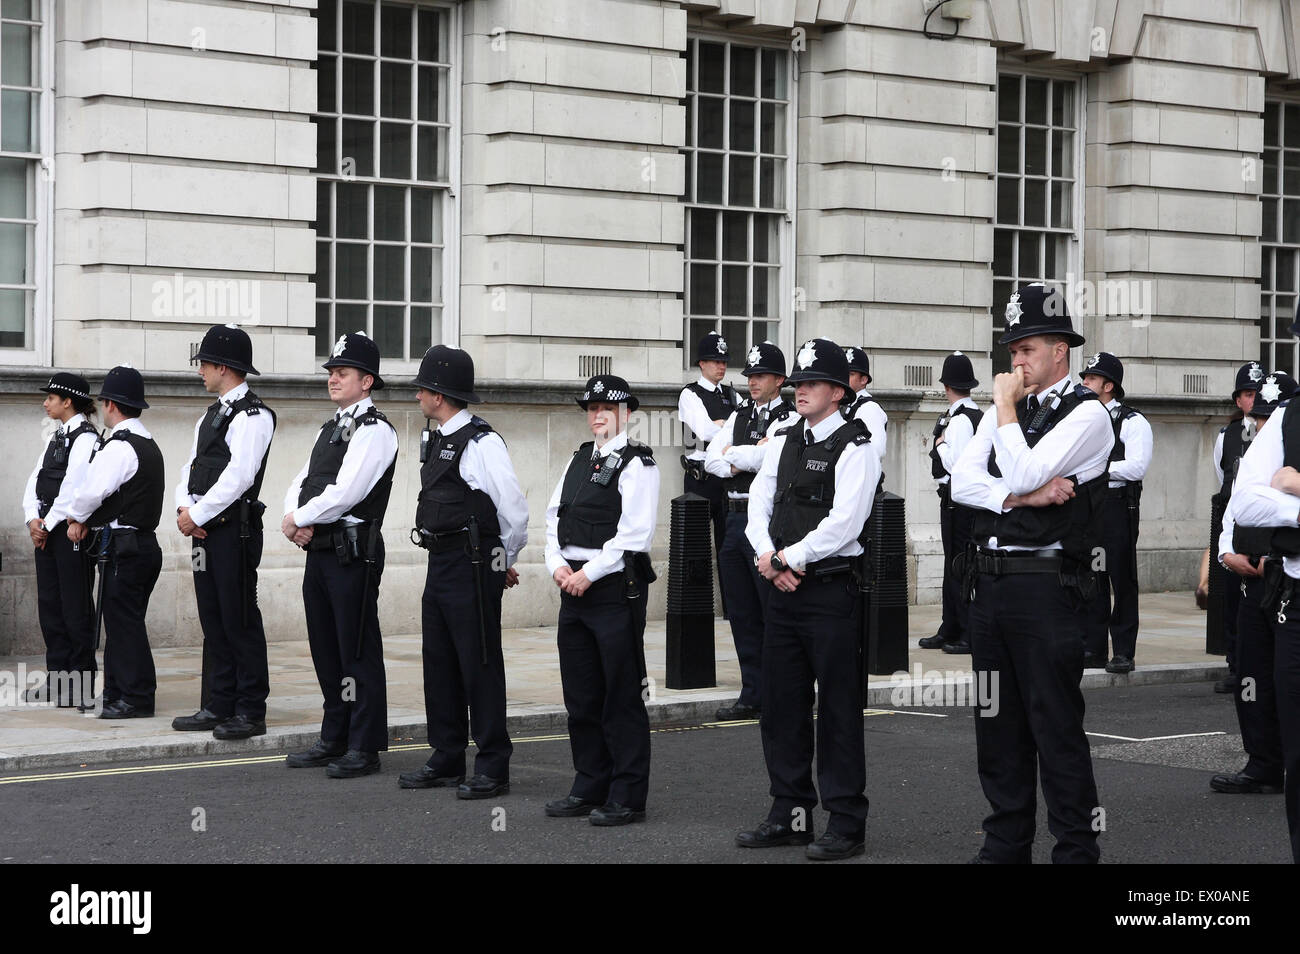 A line of police officers form a barrier in London Stock Photo